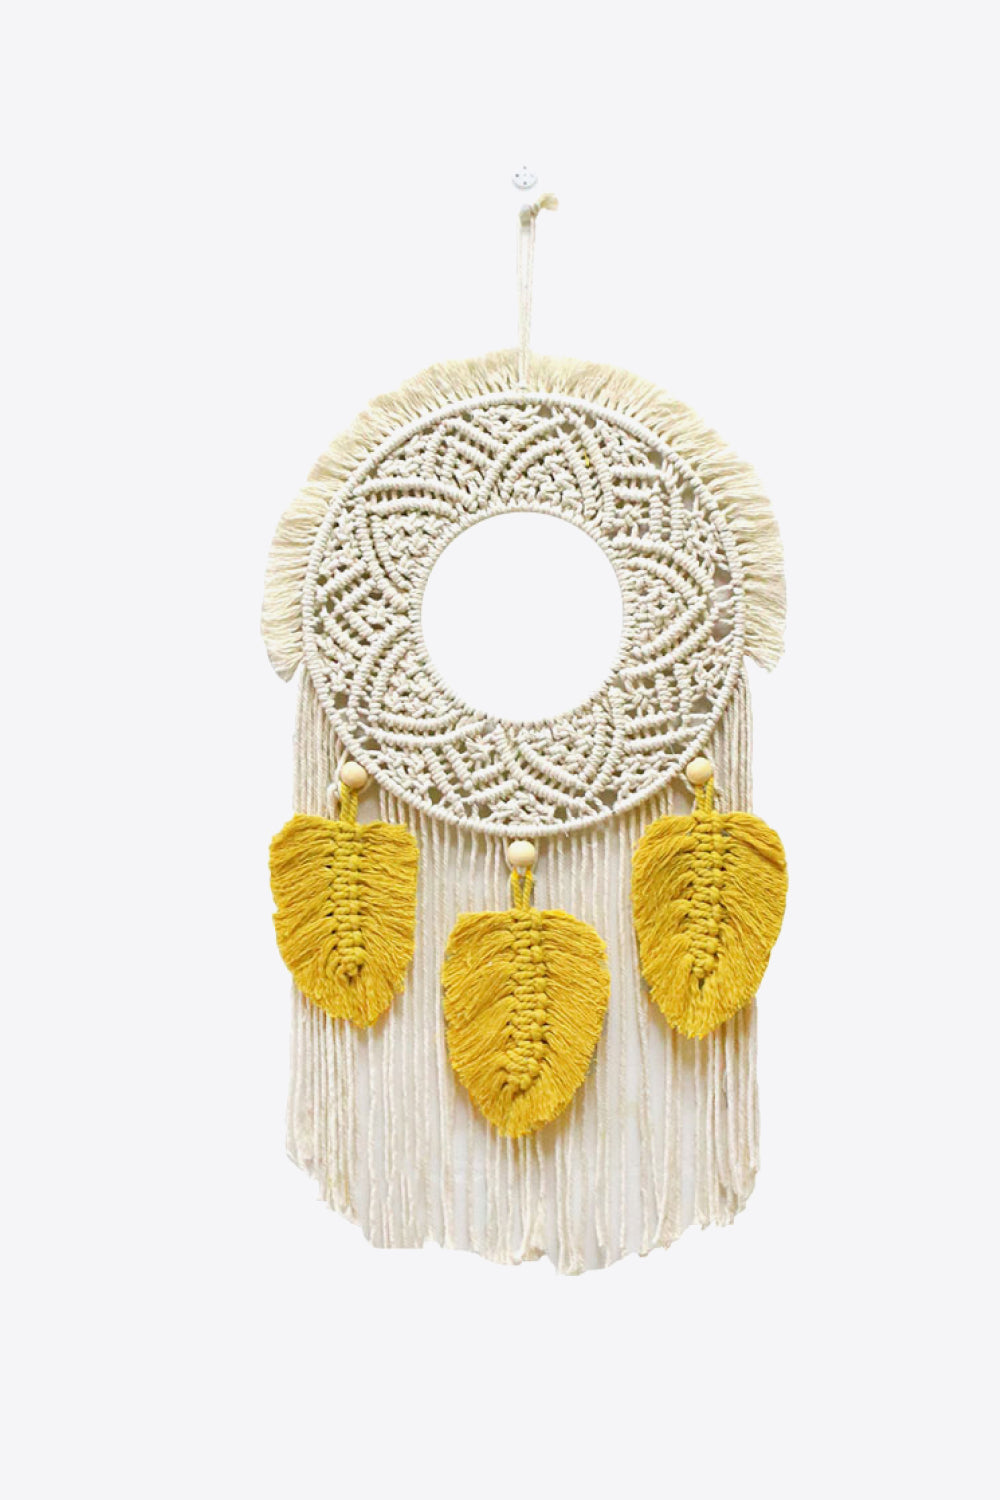 FEATHER Fringe Macrame Wall Hanging Hand-made Bohemian Home Decor Tapestry
(2 colors available)